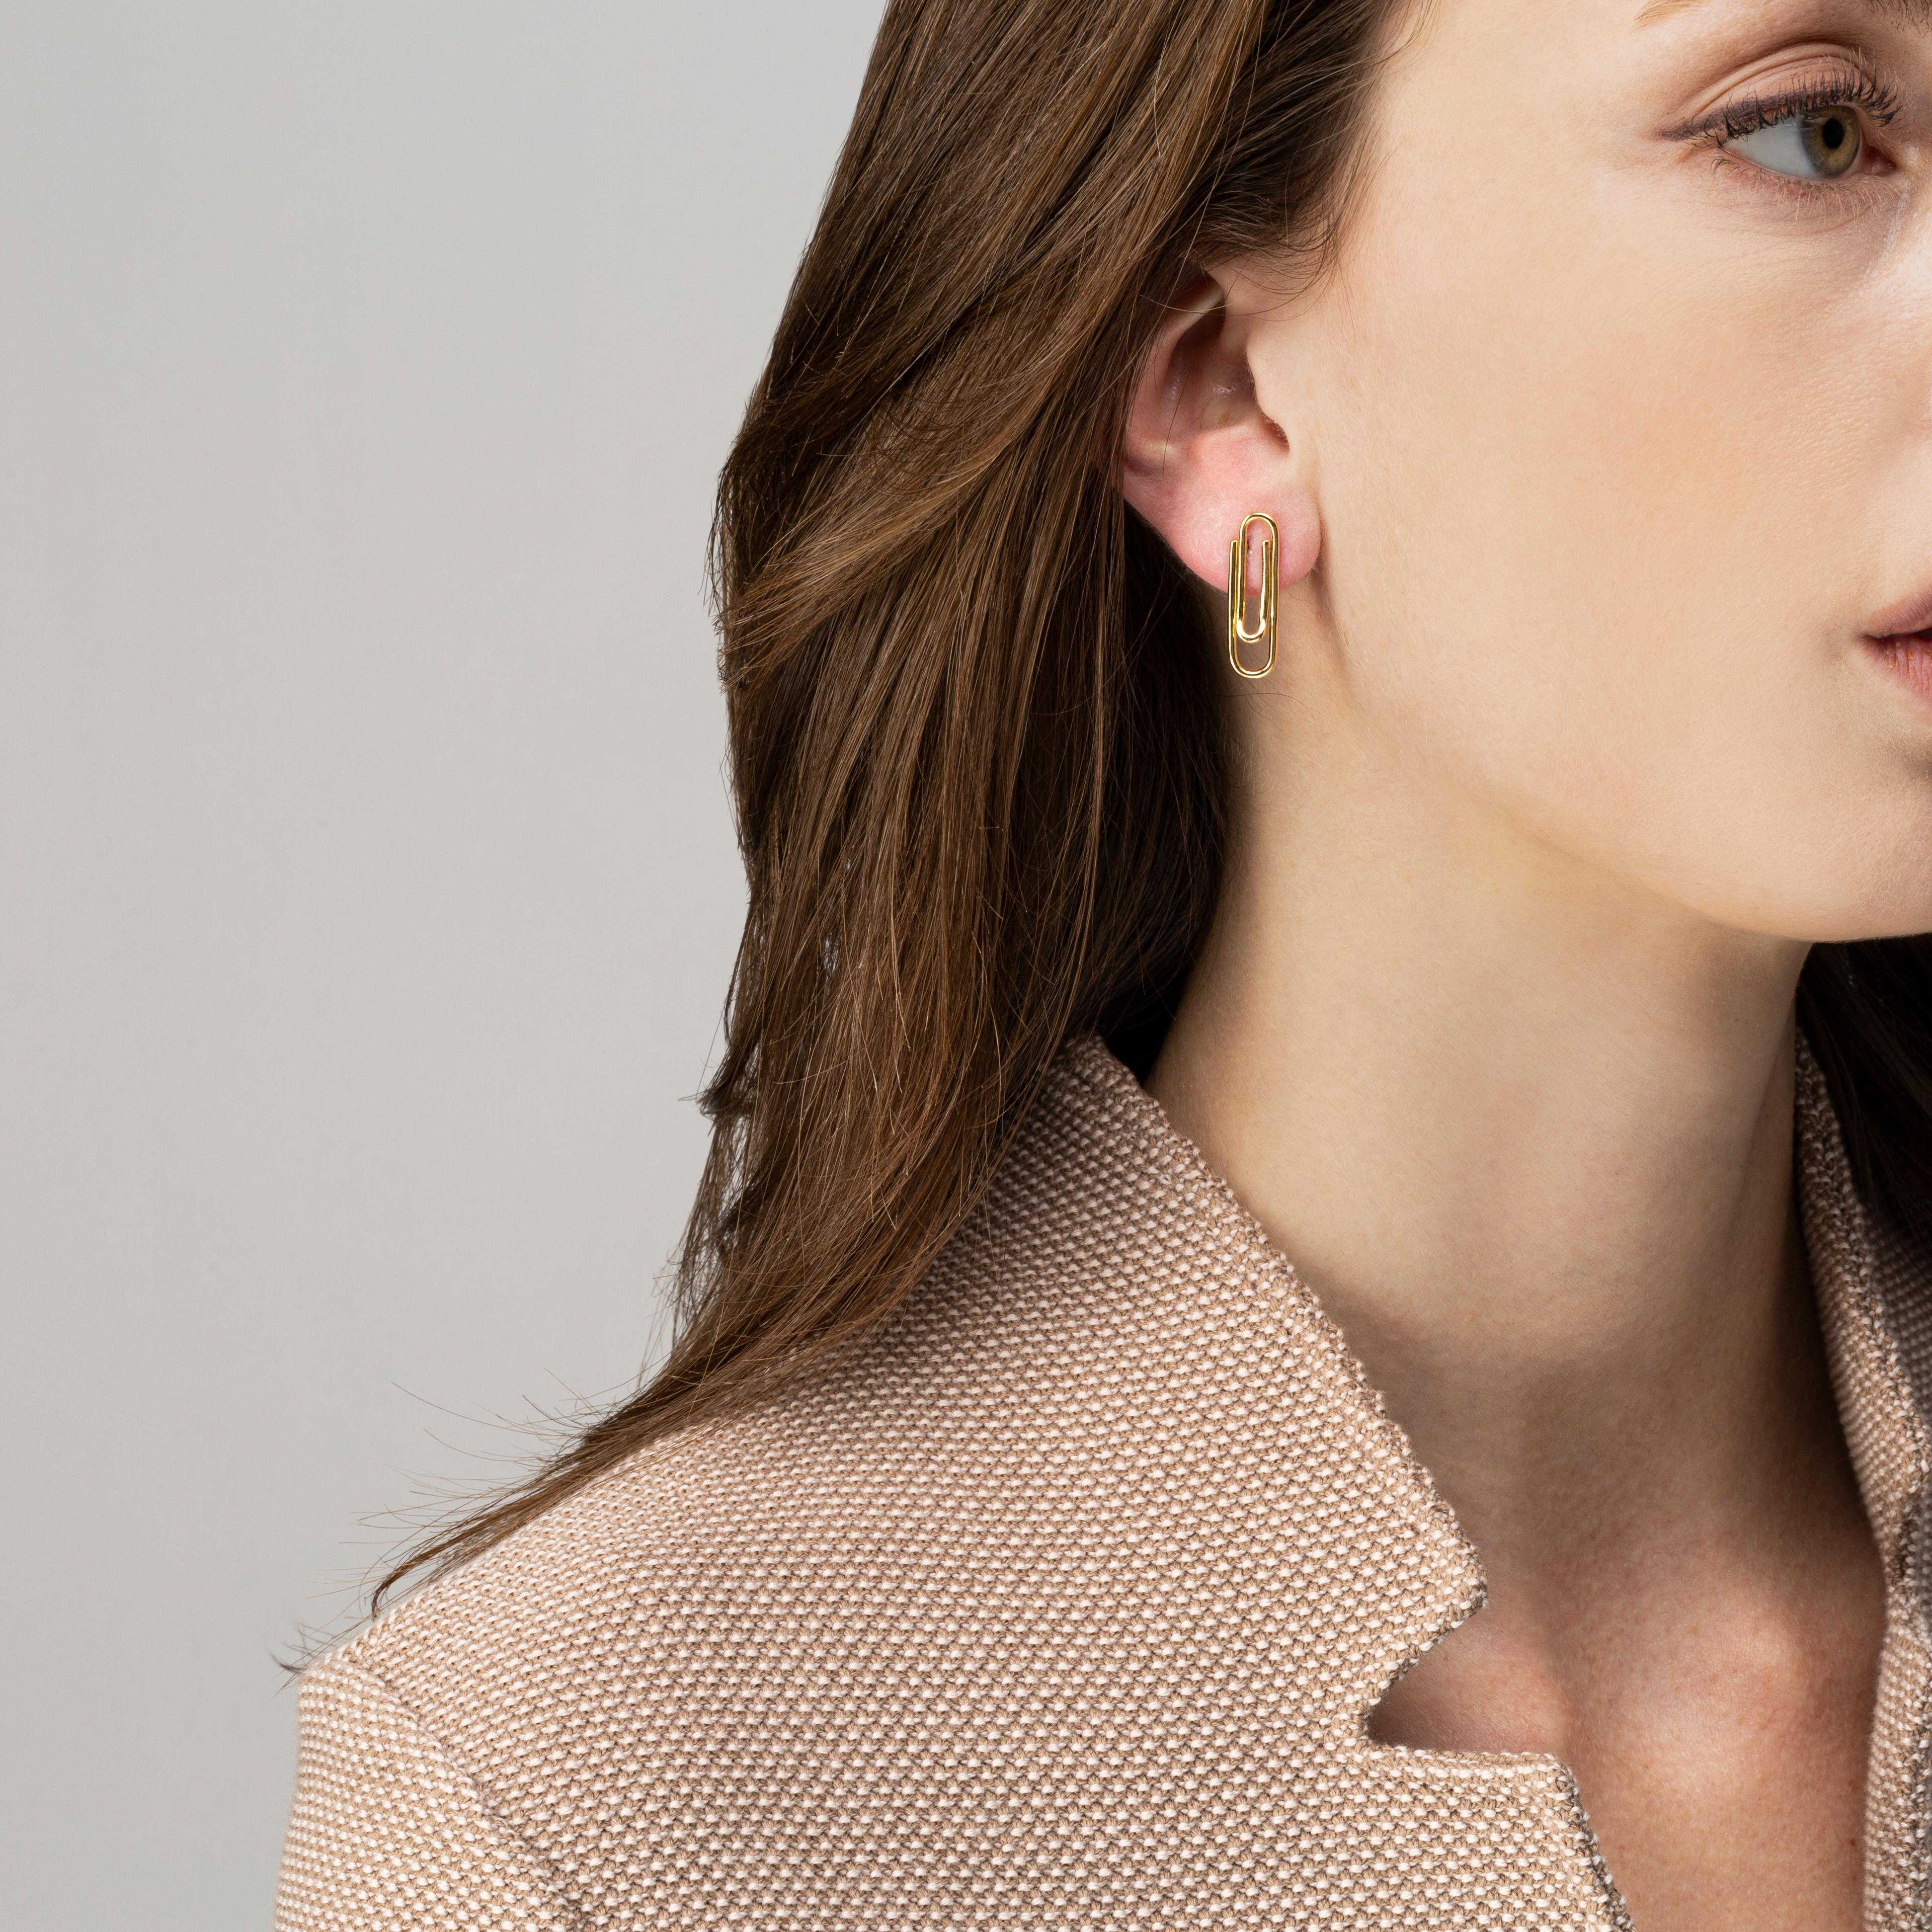 Alex Jona design collection, hand crafted in Italy, 18 karat yellow gold paper clip stud earrings
Dimensions:  H  1.01in/25.73mm, W 0.34in/8,6mm, D 0.09in/2.49mm.

Alex Jona jewels stand out, not only for their special design and for the excellent